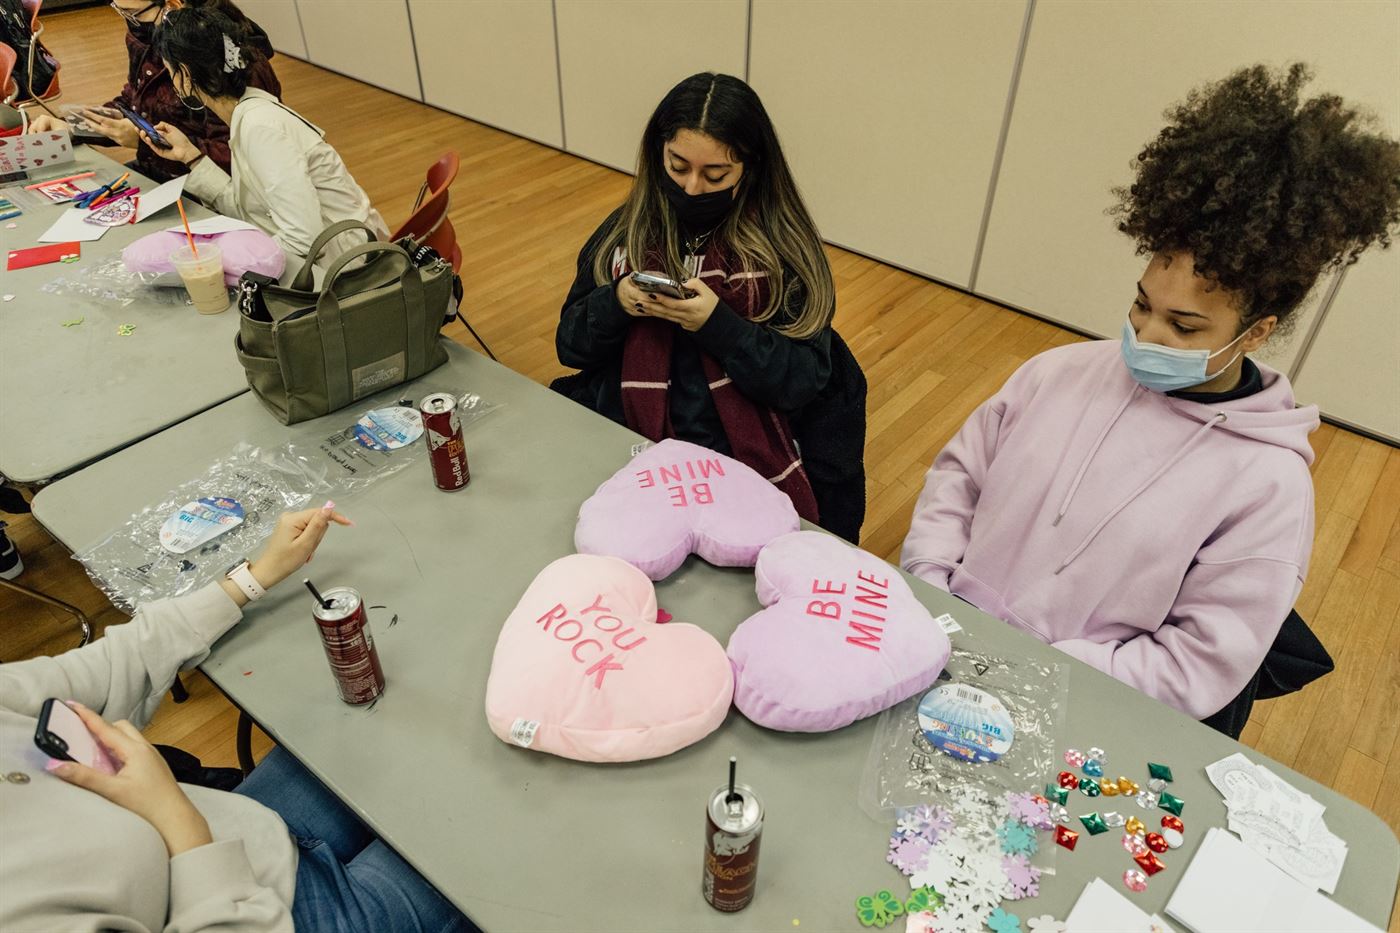 Students made heart-shaped plushies at the event. Karsten Englander | The Montclarion